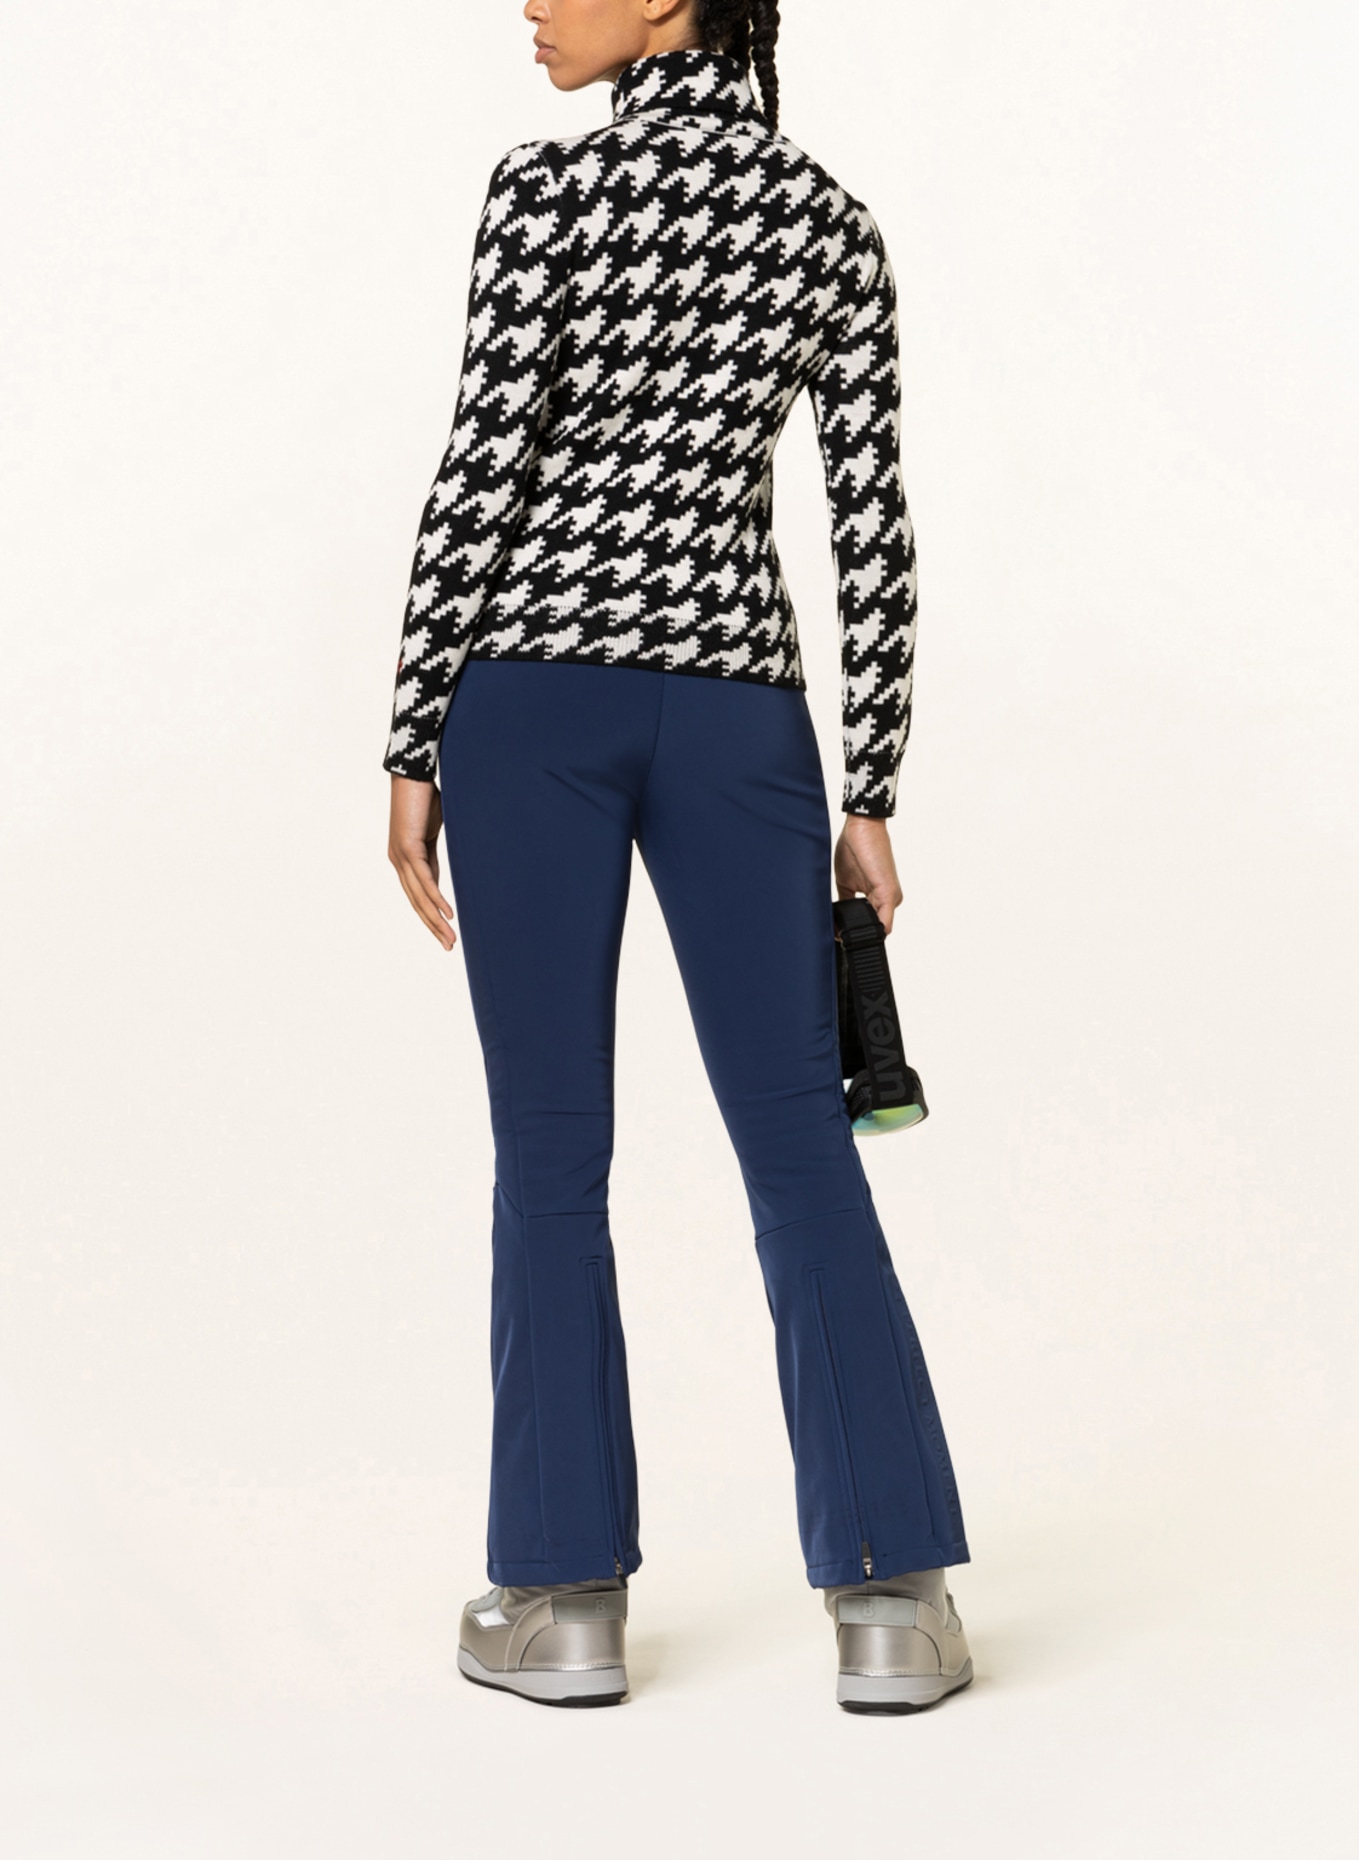 PERFECT MOMENT Turtleneck sweater HOUNDSTOOTH made of merino wool, Color: BLACK/ WHITE (Image 3)